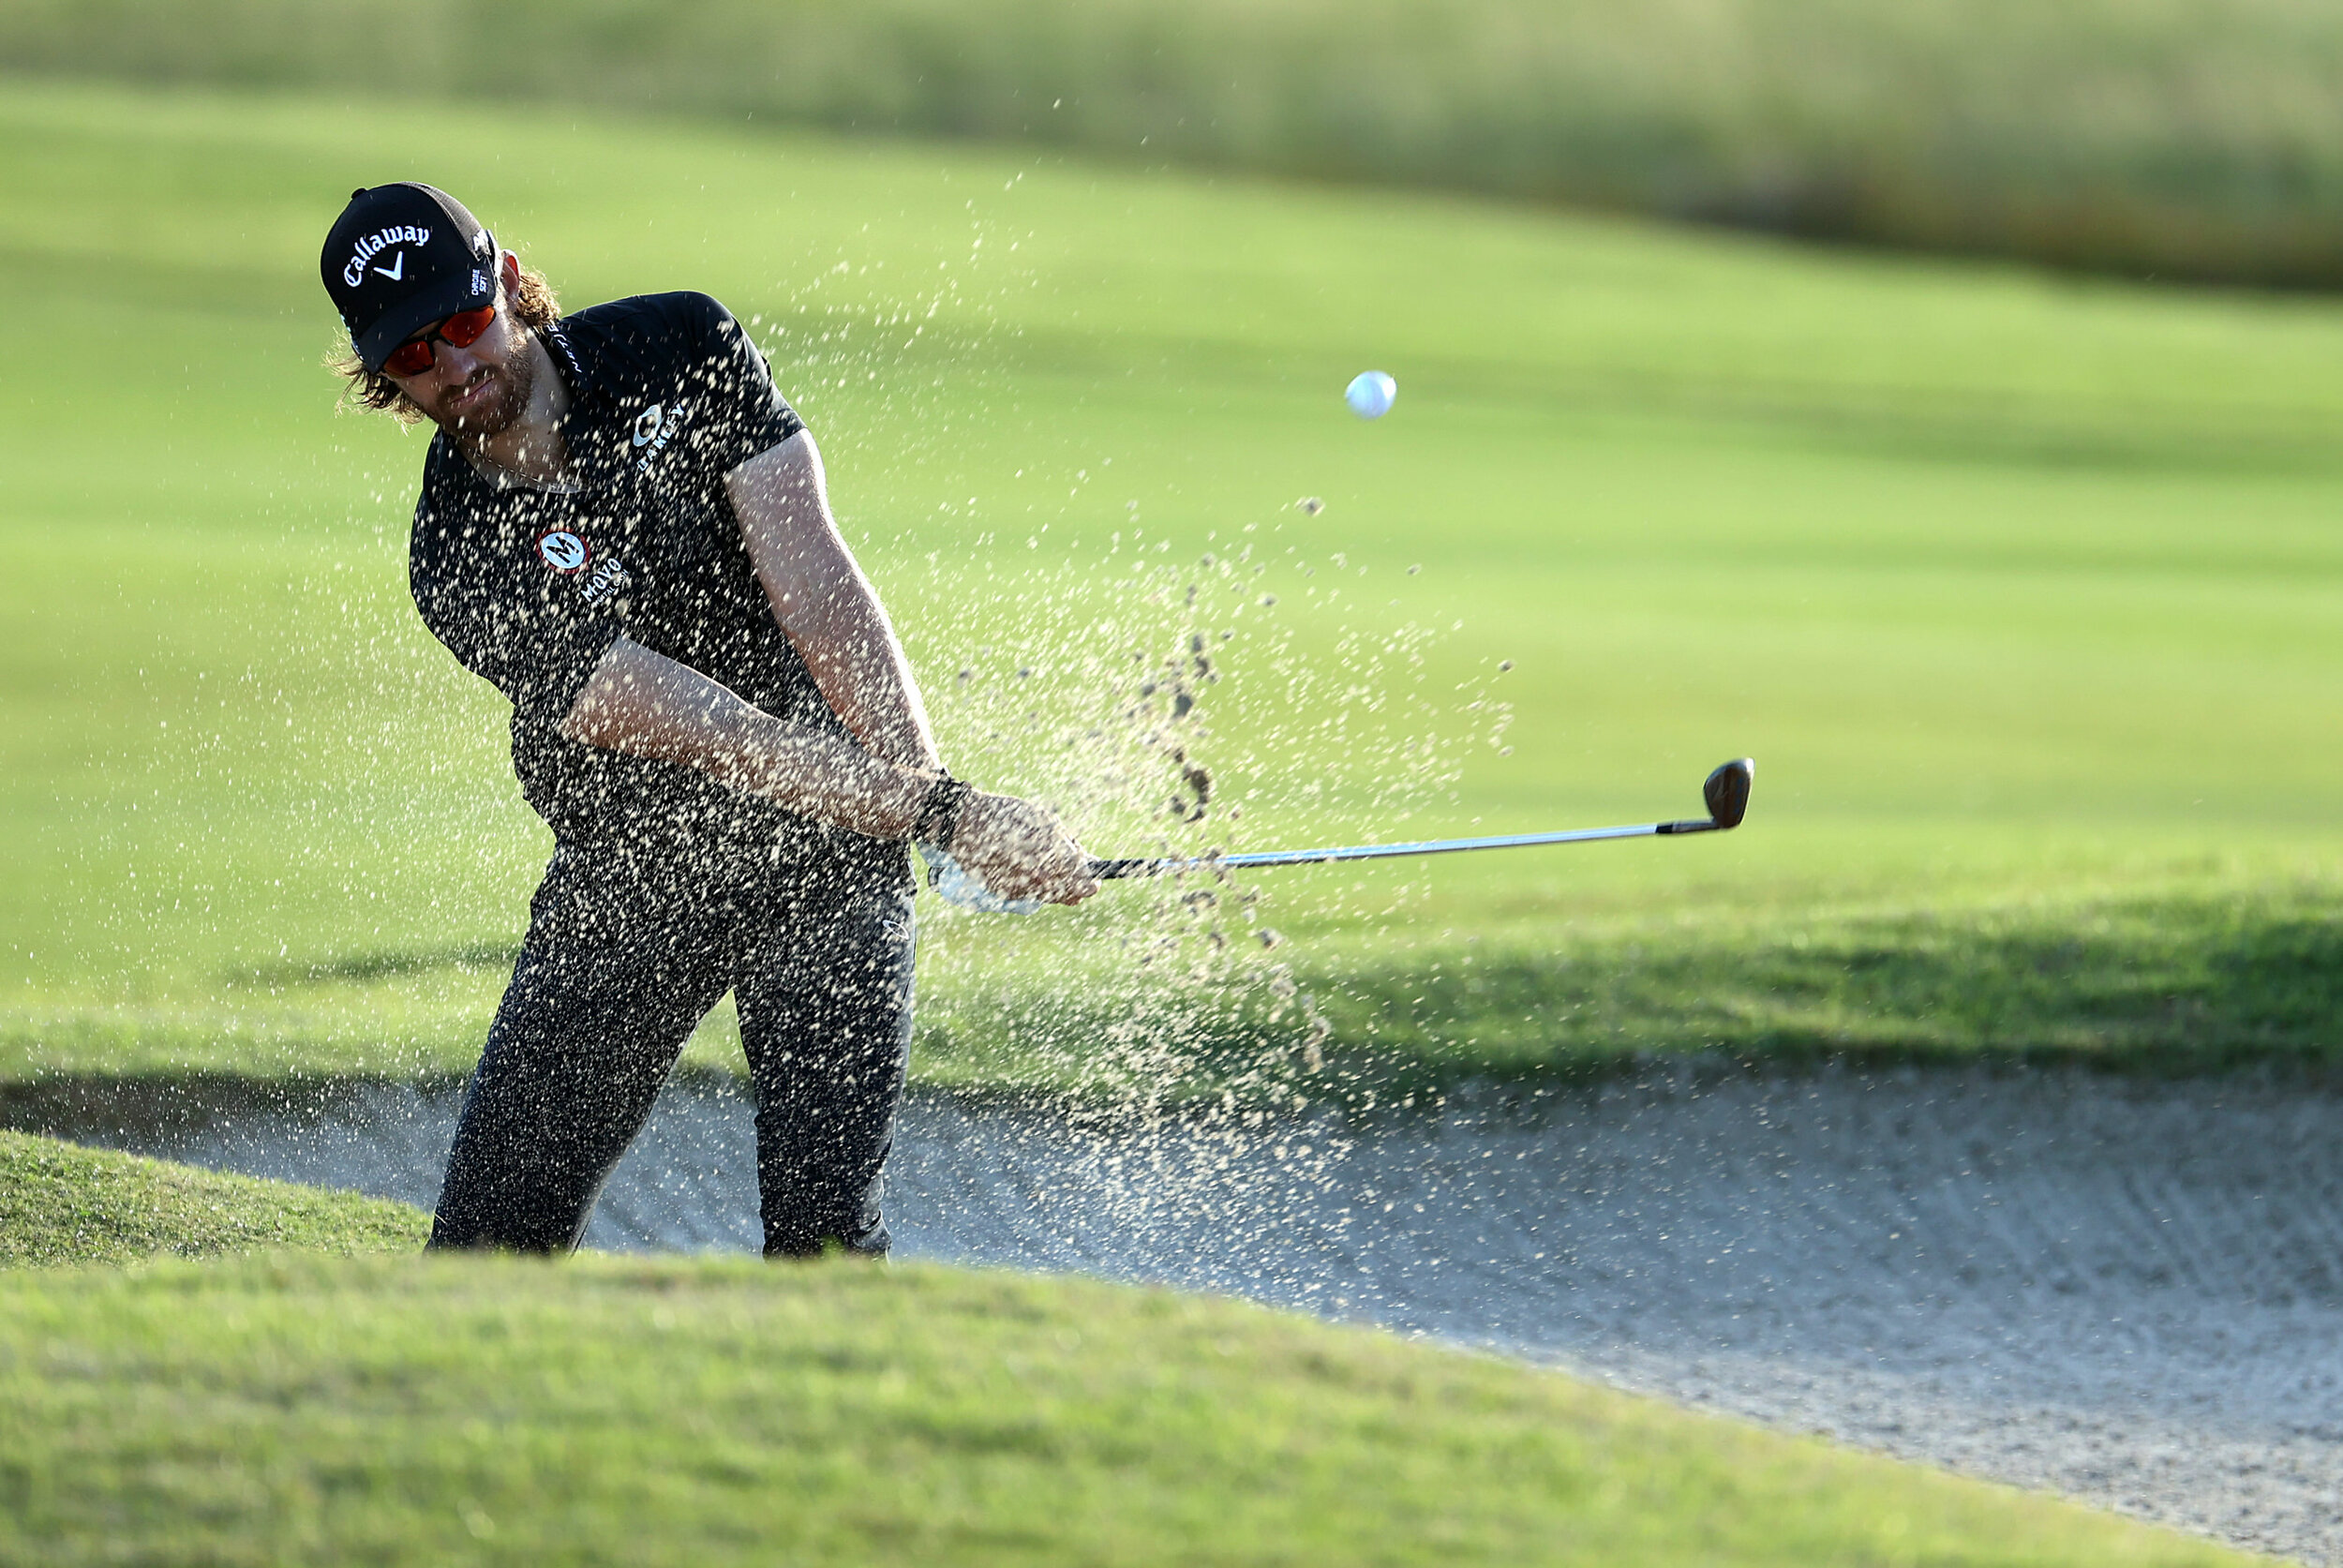  RIO GRANDE, PUERTO RICO - FEBRUARY 25: Patrick Rodgers plays a shot from a bunker on the second hole during the first round of the Puerto Rico Open at Grand Reserve Country Club on February 25, 2021 in Rio Grande, Puerto Rico.  (Photo by Andy Lyons/